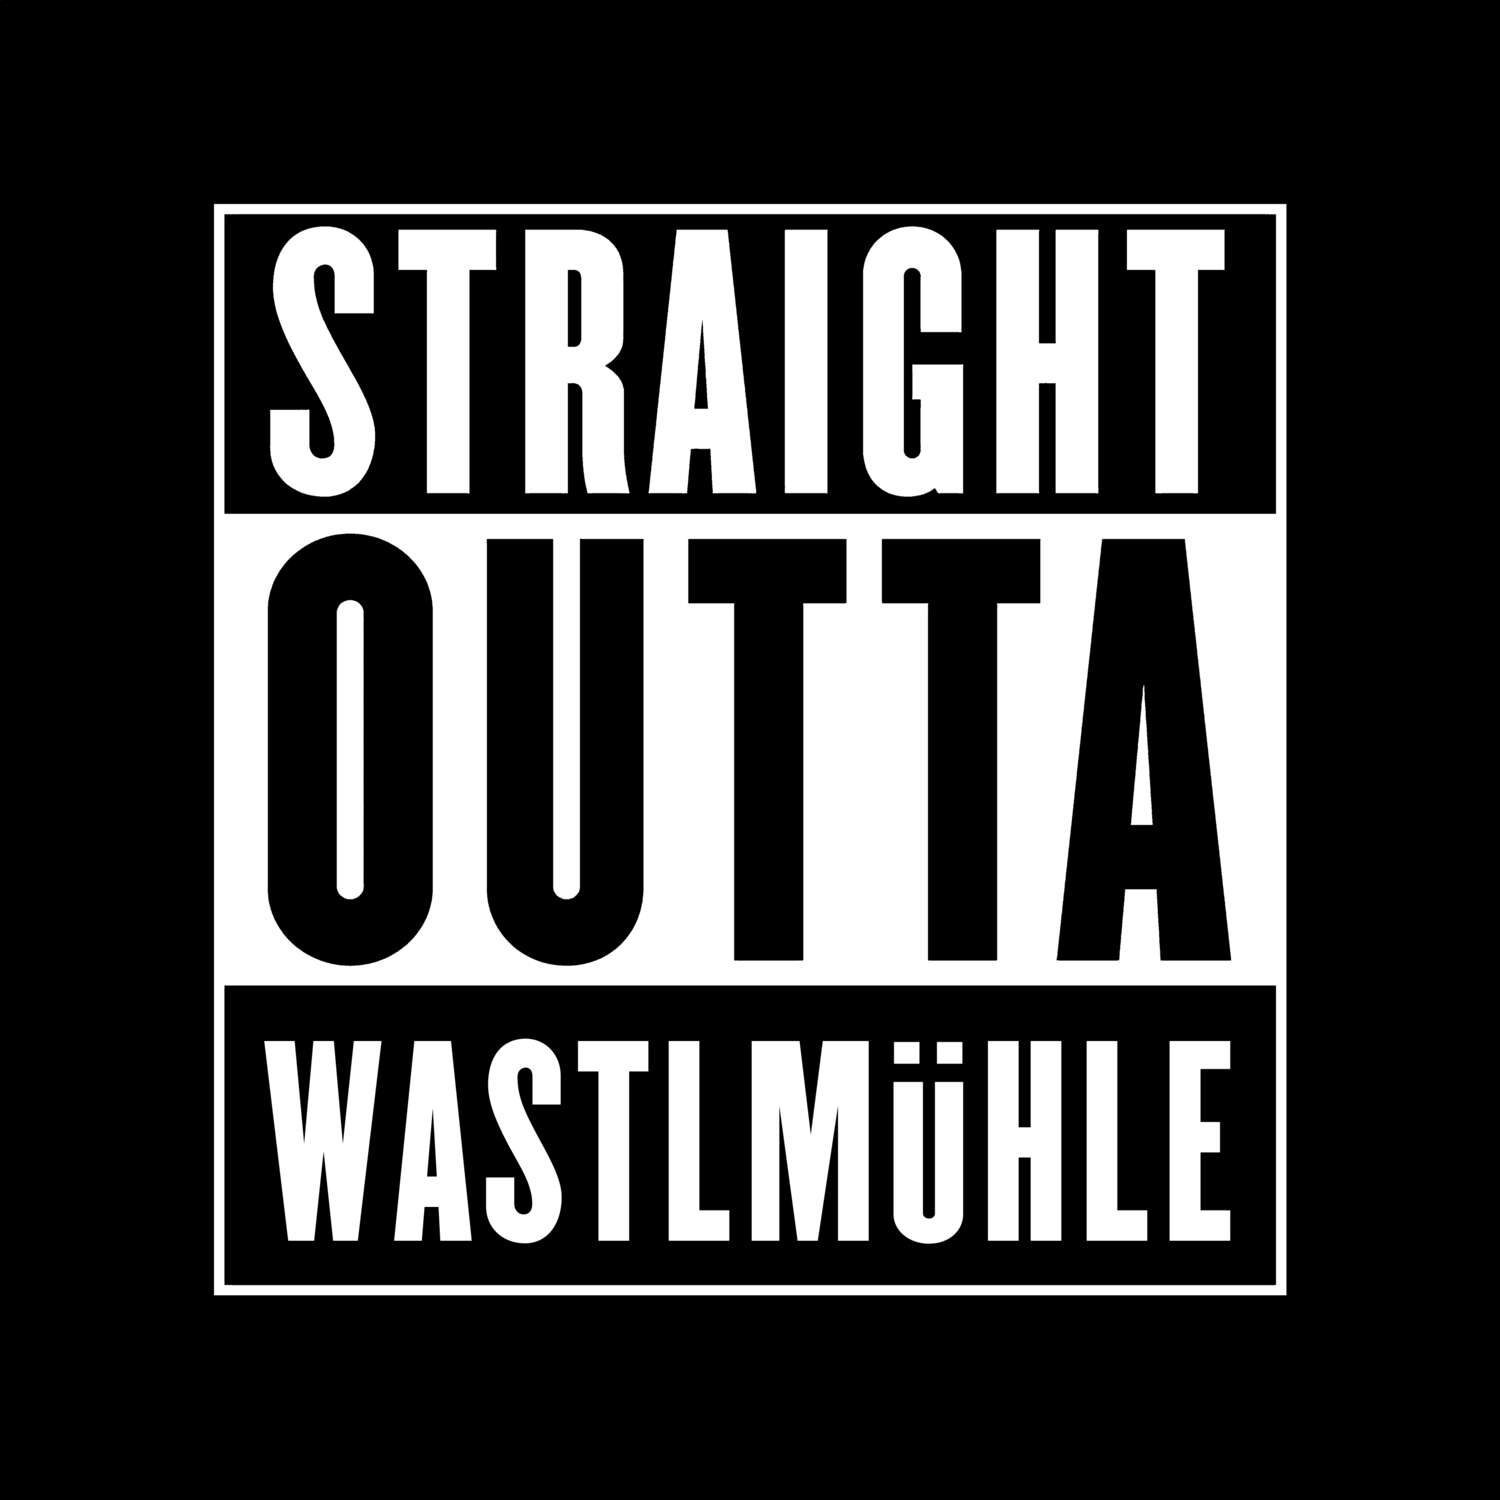 Wastlmühle T-Shirt »Straight Outta«